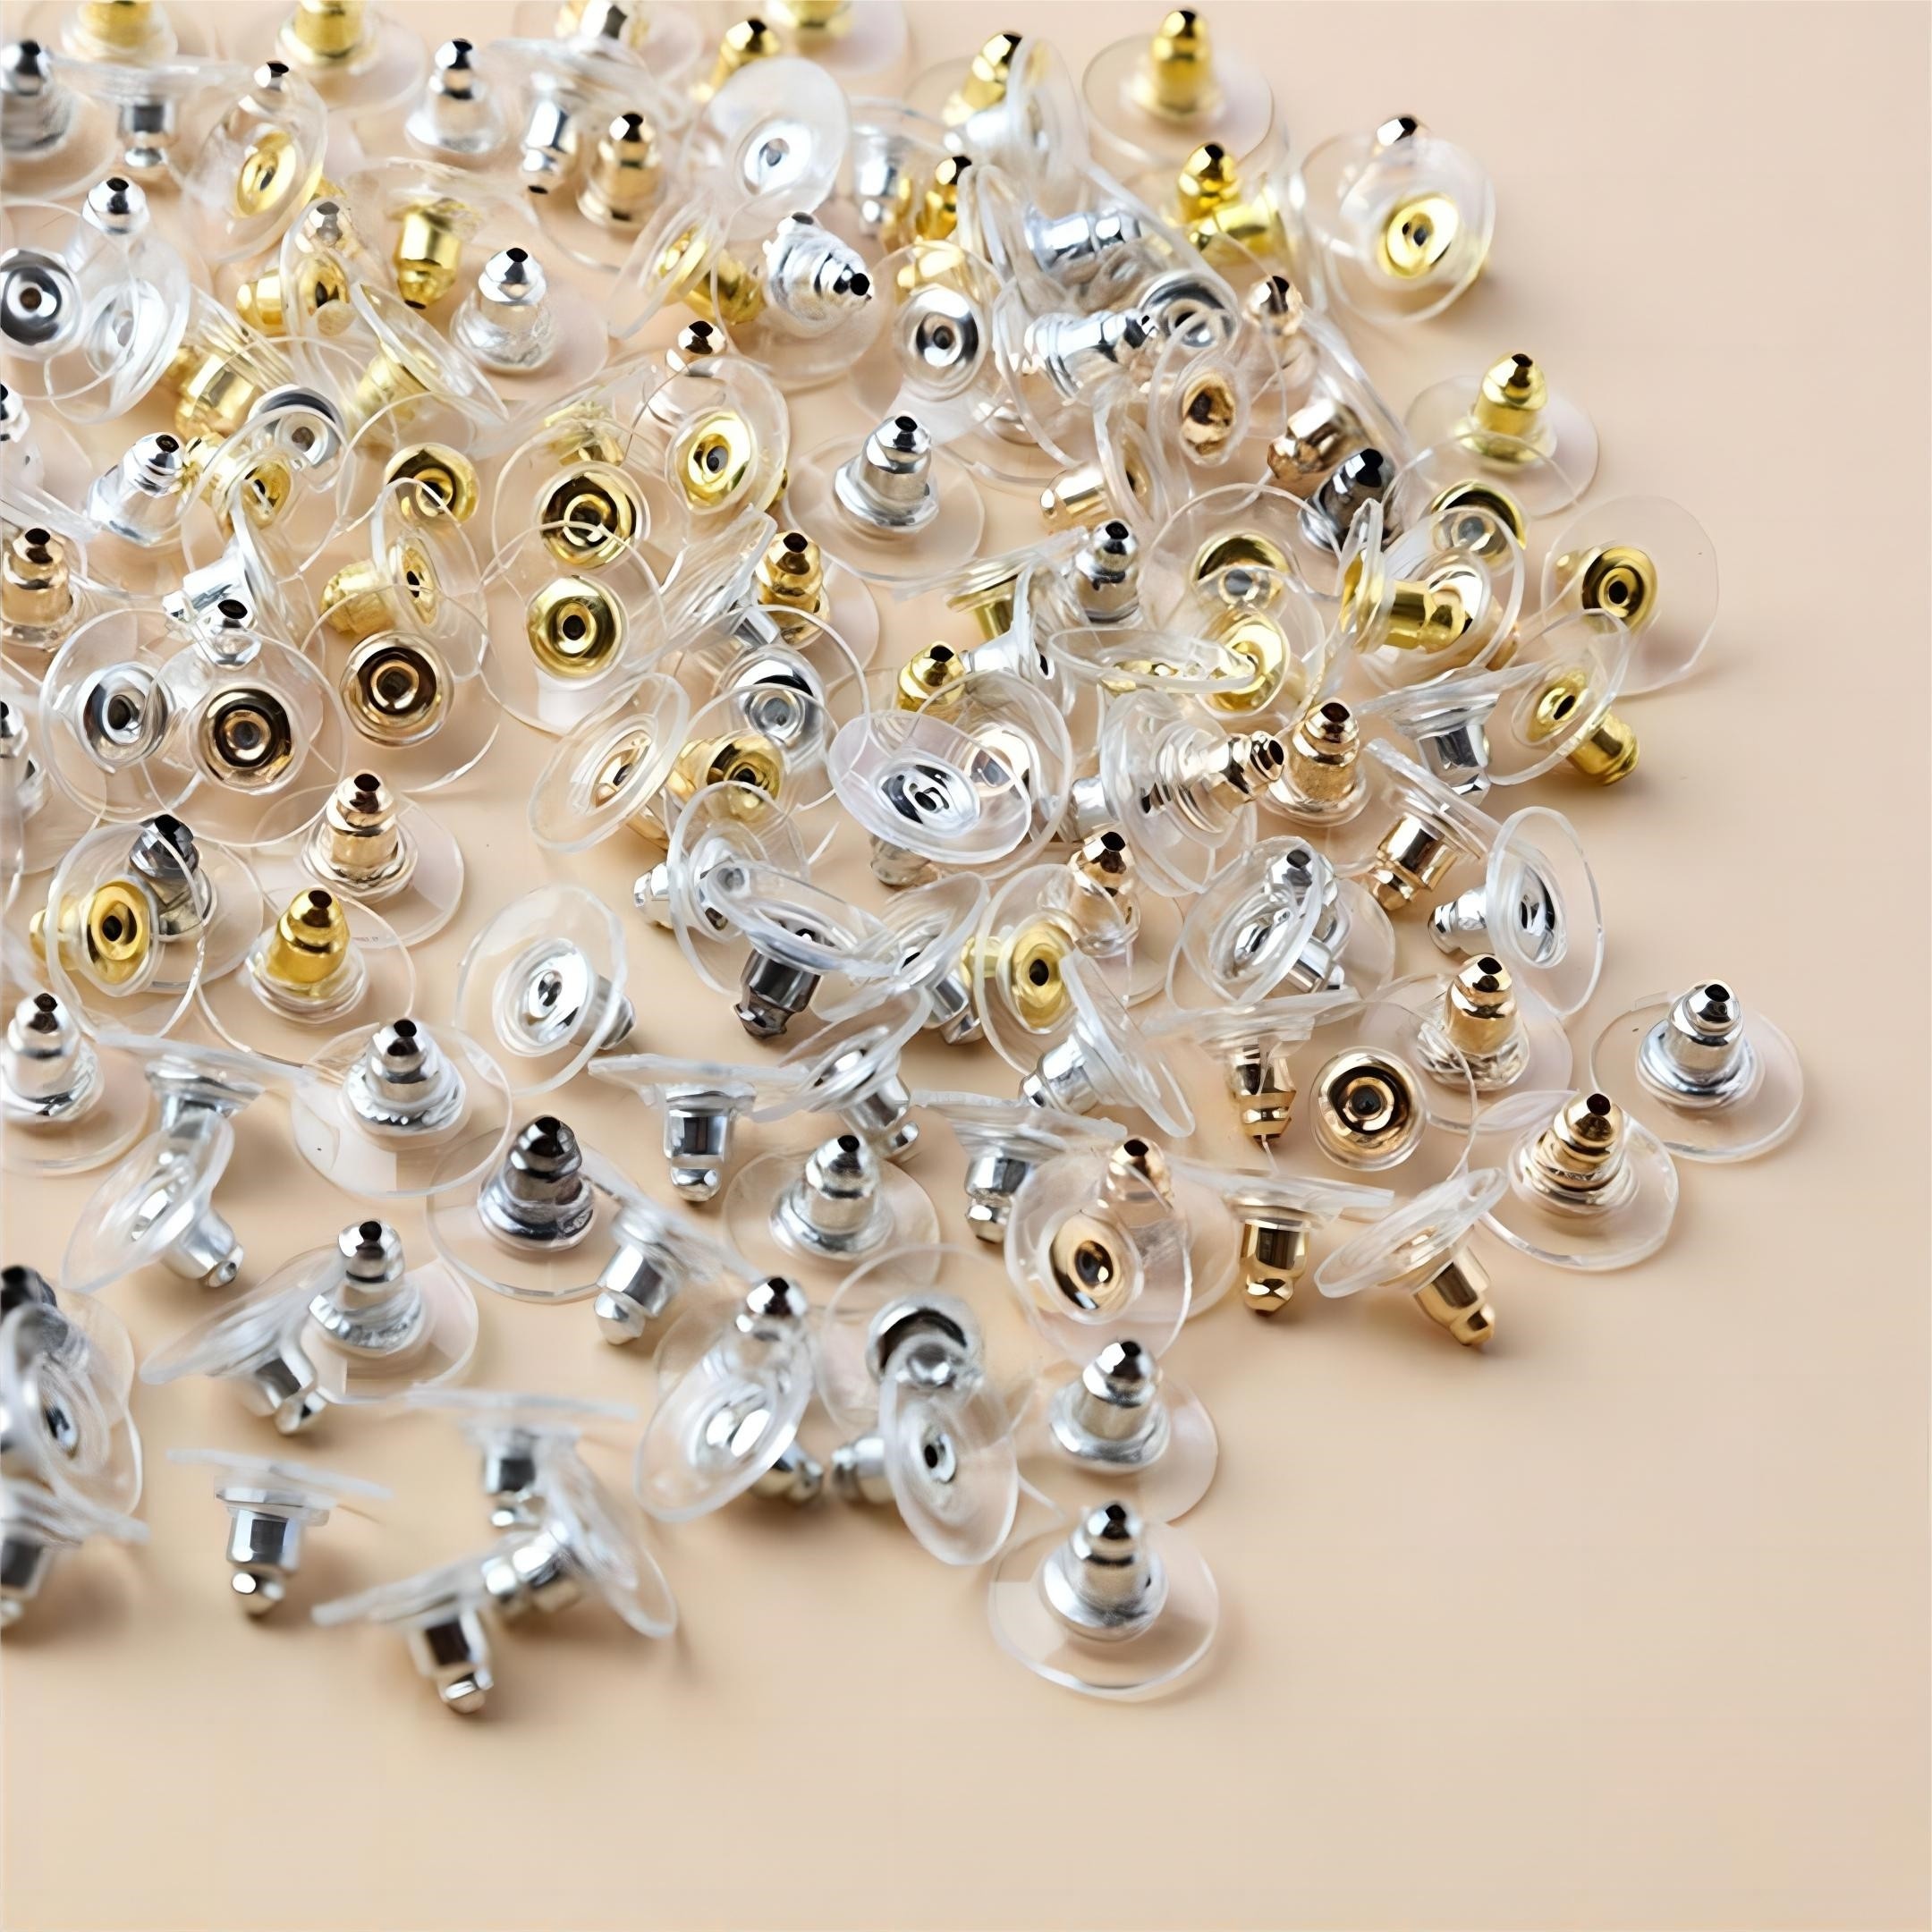 100pcs Earring Backs With Pad And Secure Backs For Droopy Earrings